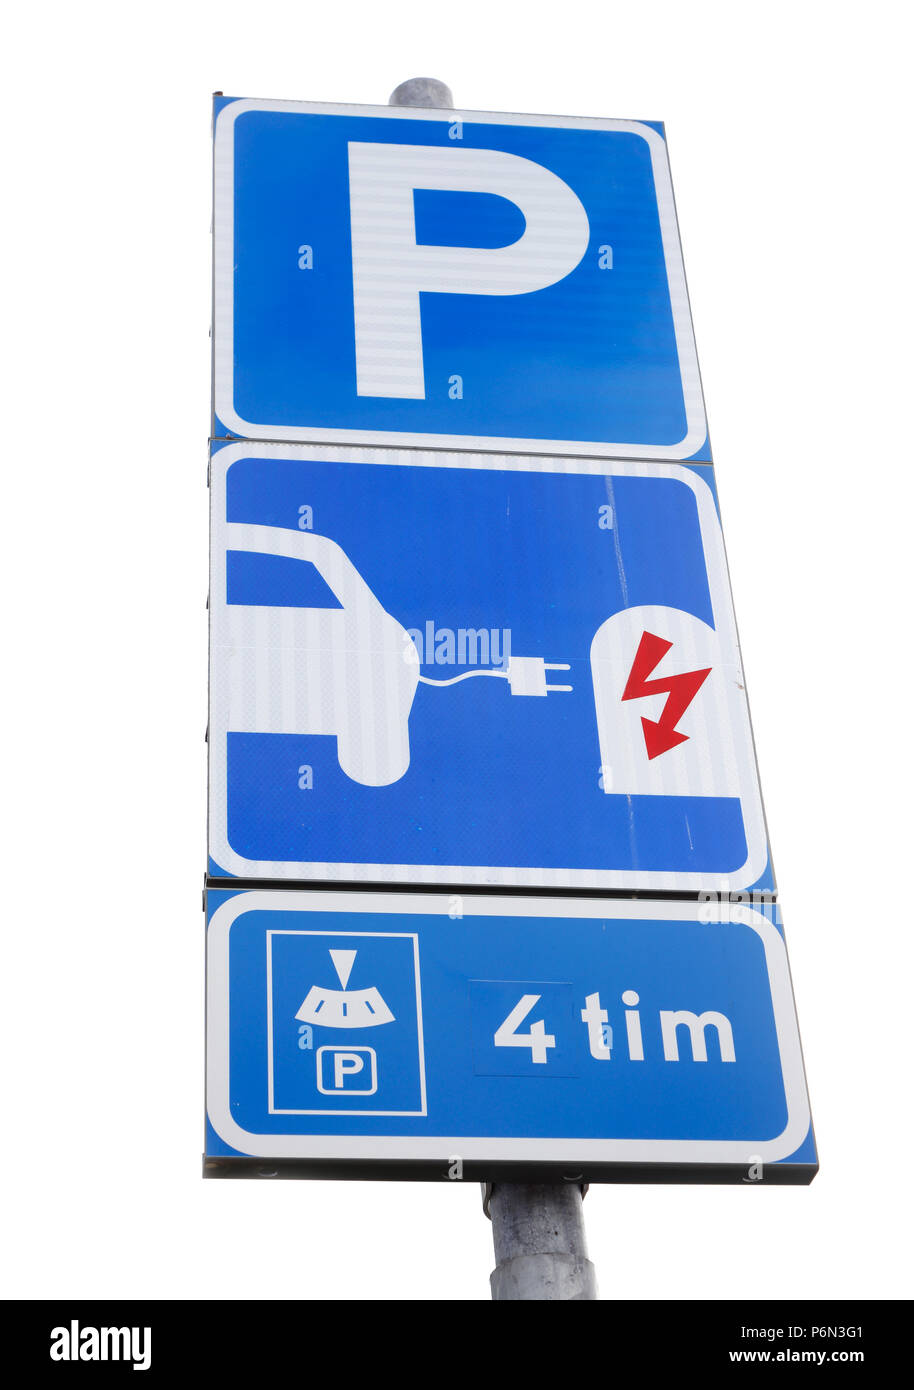 Swedish road sign at the parking lot intended for charging electric cars. Parking disc should be used to measure parking time of no more than four hou Stock Photo